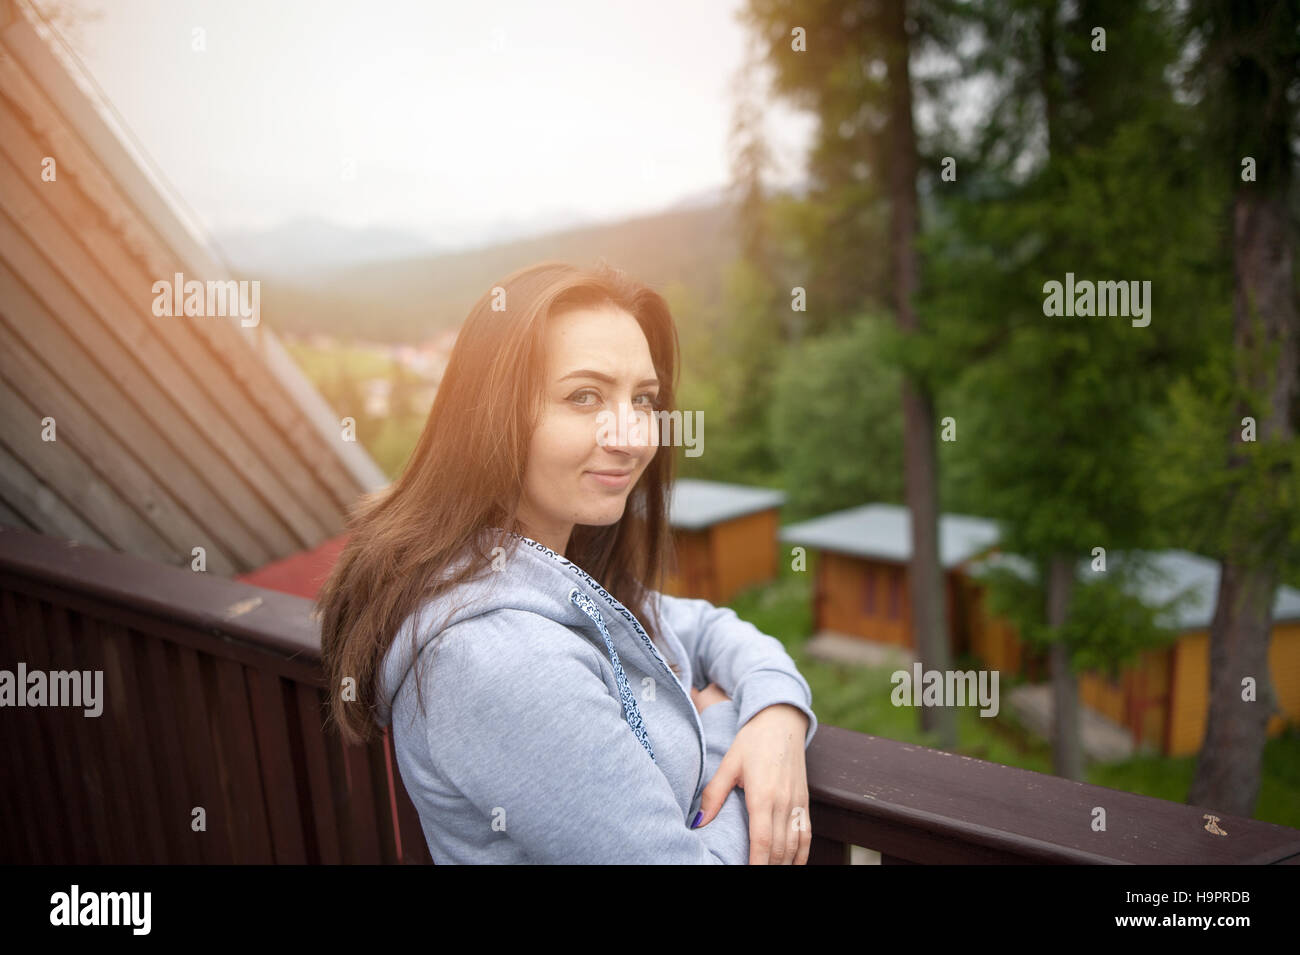 beautiful brunette teen girl with long hair leaning on railing Stock Photo